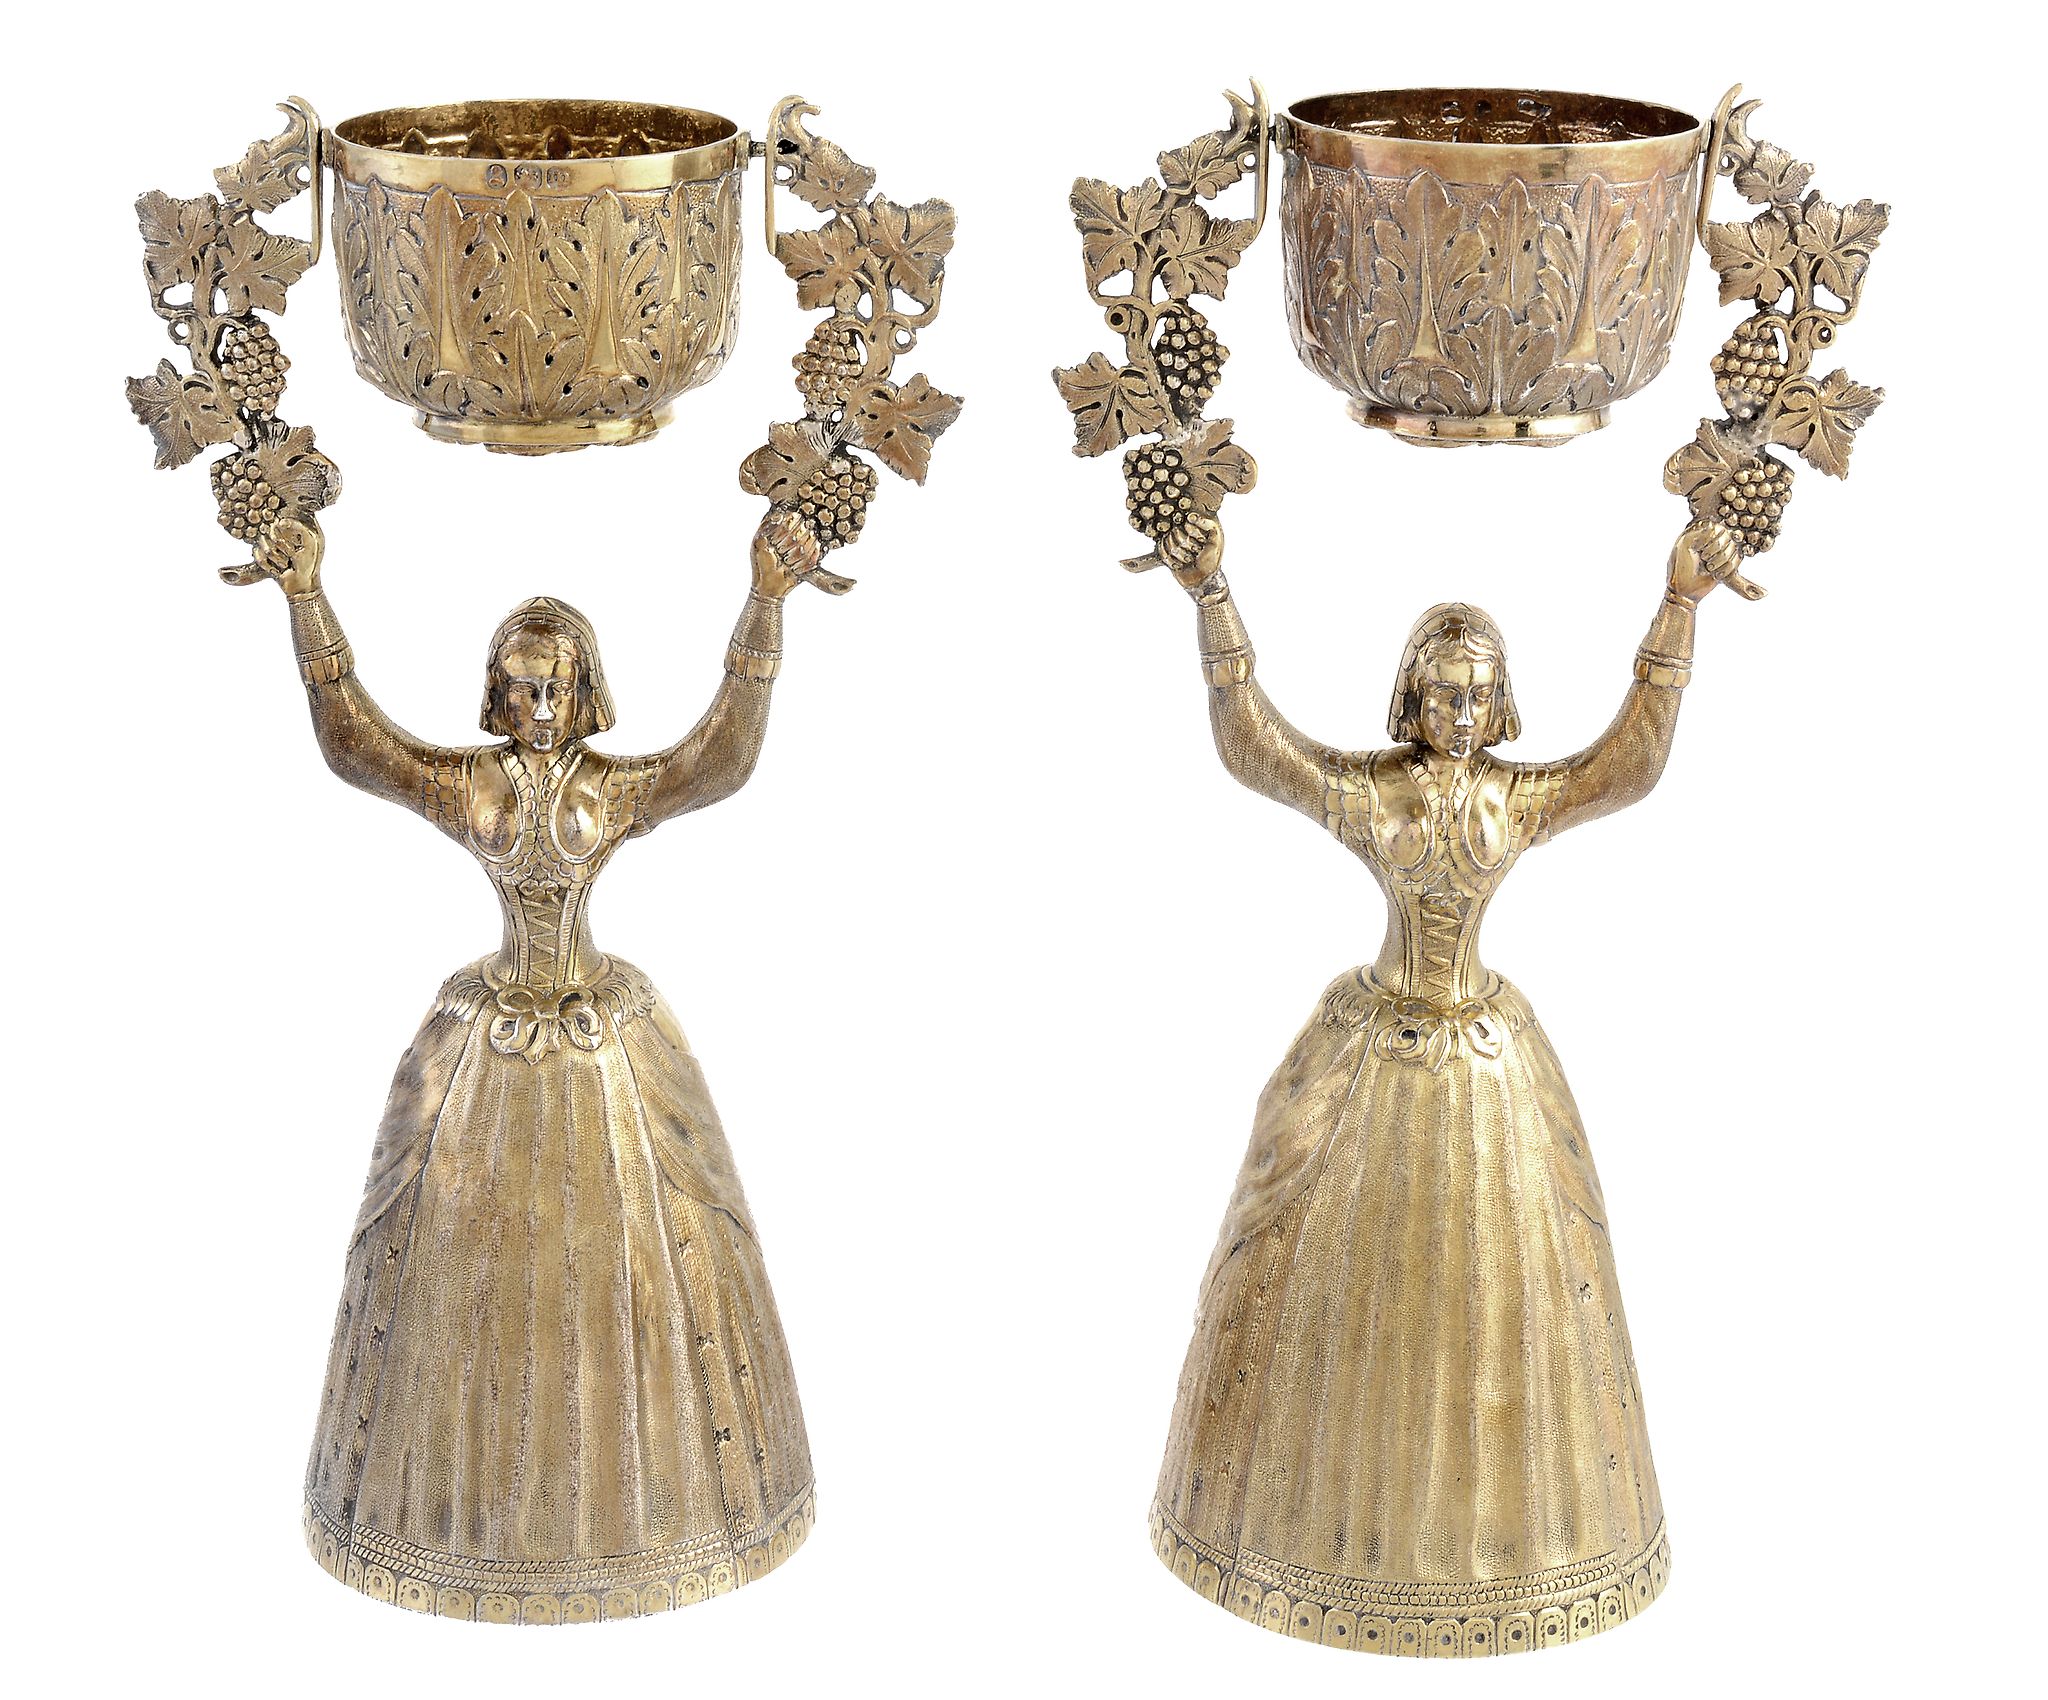 A pair of George IV silver gilt wager cups by Joseph Angell I, London 1827 A pair of George IV